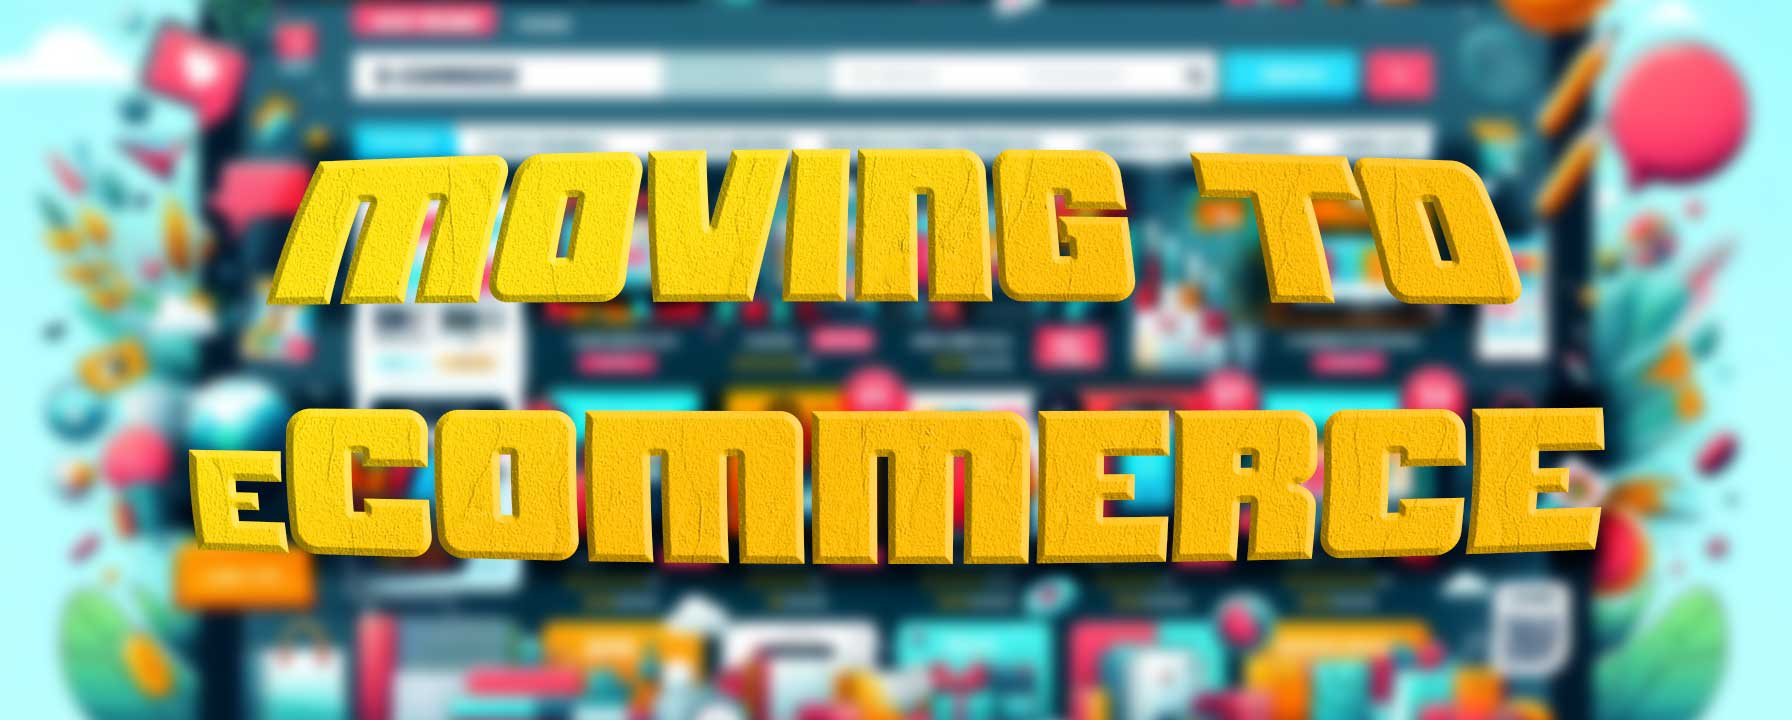 The image shows a bold, colorful graphic with the text "MOVING TO ECOMMERCE" in large, three-dimensional letters with a yellow texture. The background is vibrant and busy, filled with various icons and elements that seem to represent the different aspects and offerings of e-commerce, such as shopping carts, packages, sales tags, and possibly digital devices. It's a graphical representation often used in digital marketing materials to emphasize the shift or transition towards online business and retail platforms.